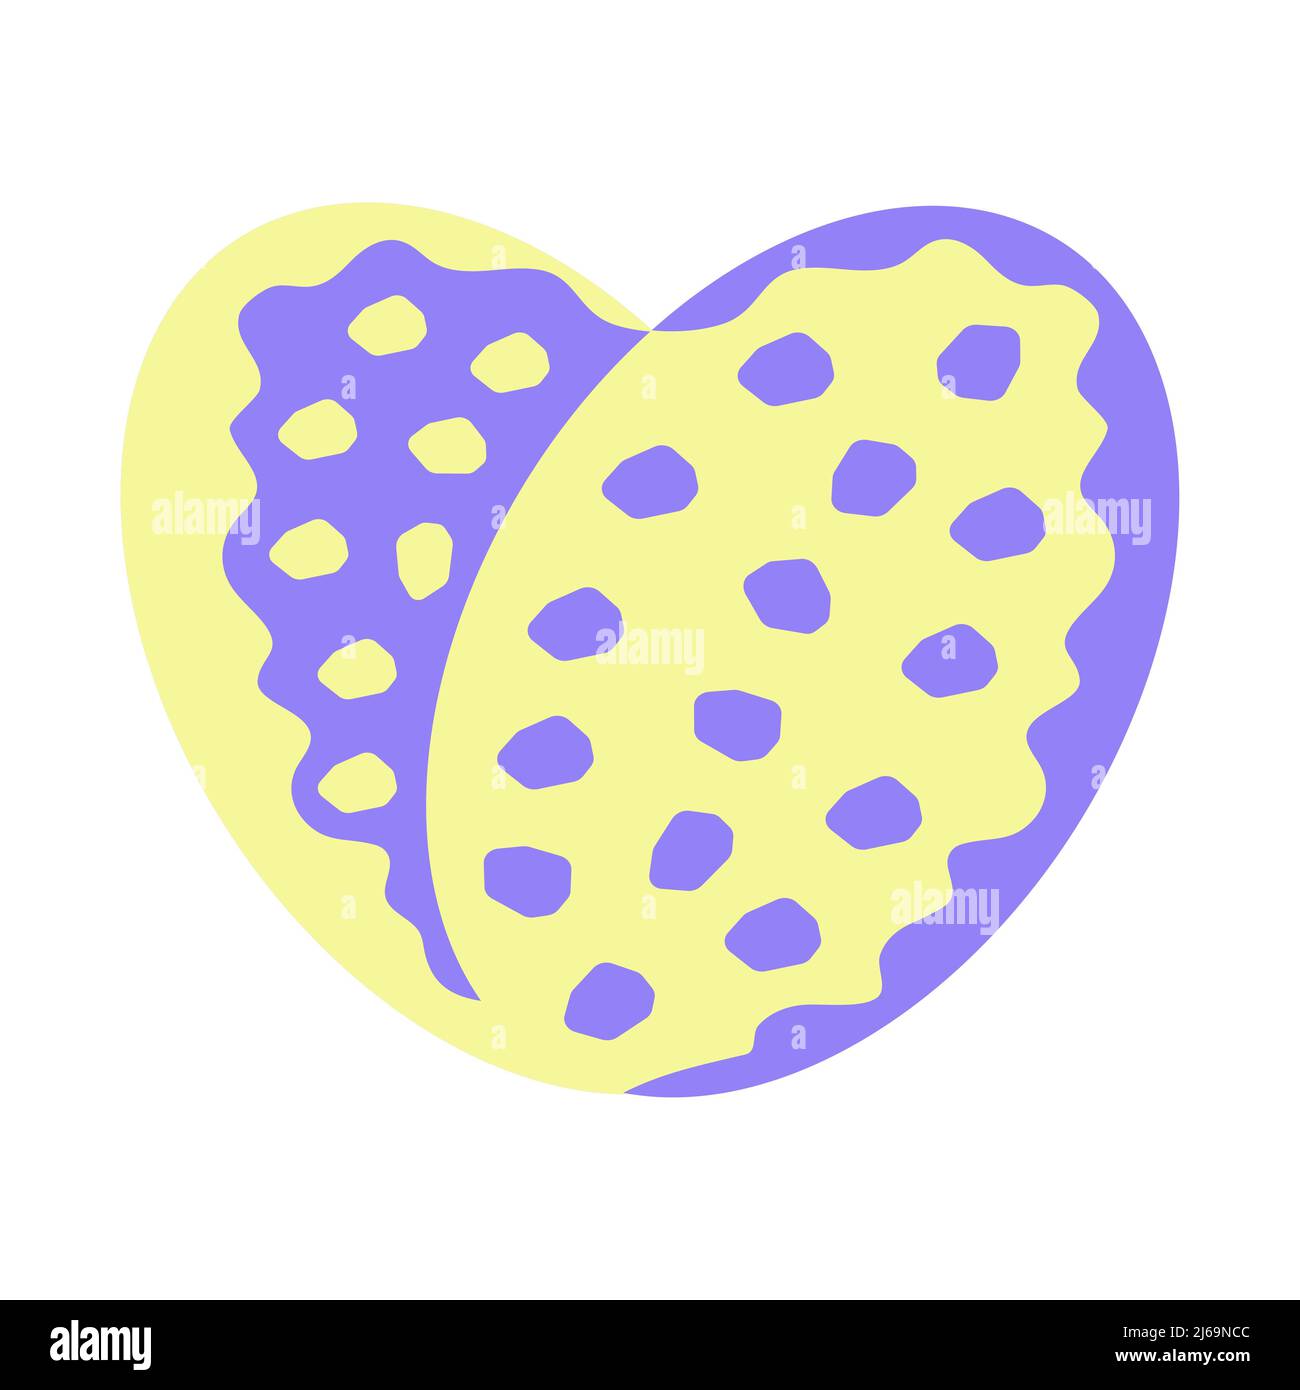 Blue-yellow heart with abstract spots, illustration in Ukrainian style Stock Vector